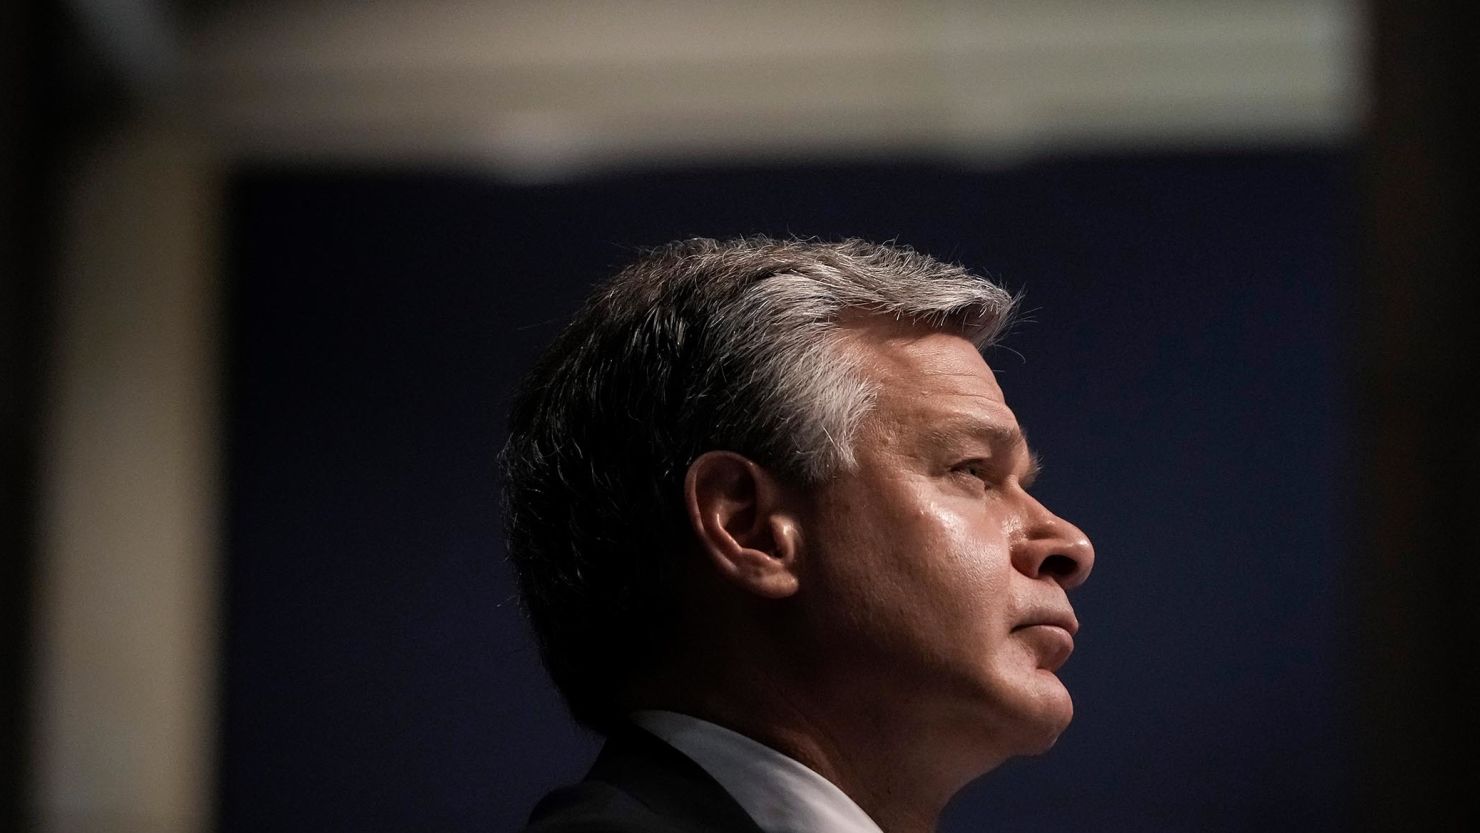 FBI Director Christopher Wray testifies during a House Judiciary Committee oversight hearing on Capitol Hill June 10, 2021 in Washington, DC. House lawmakers now want him to brief them about the FBI's response to a ransomware attack in July.